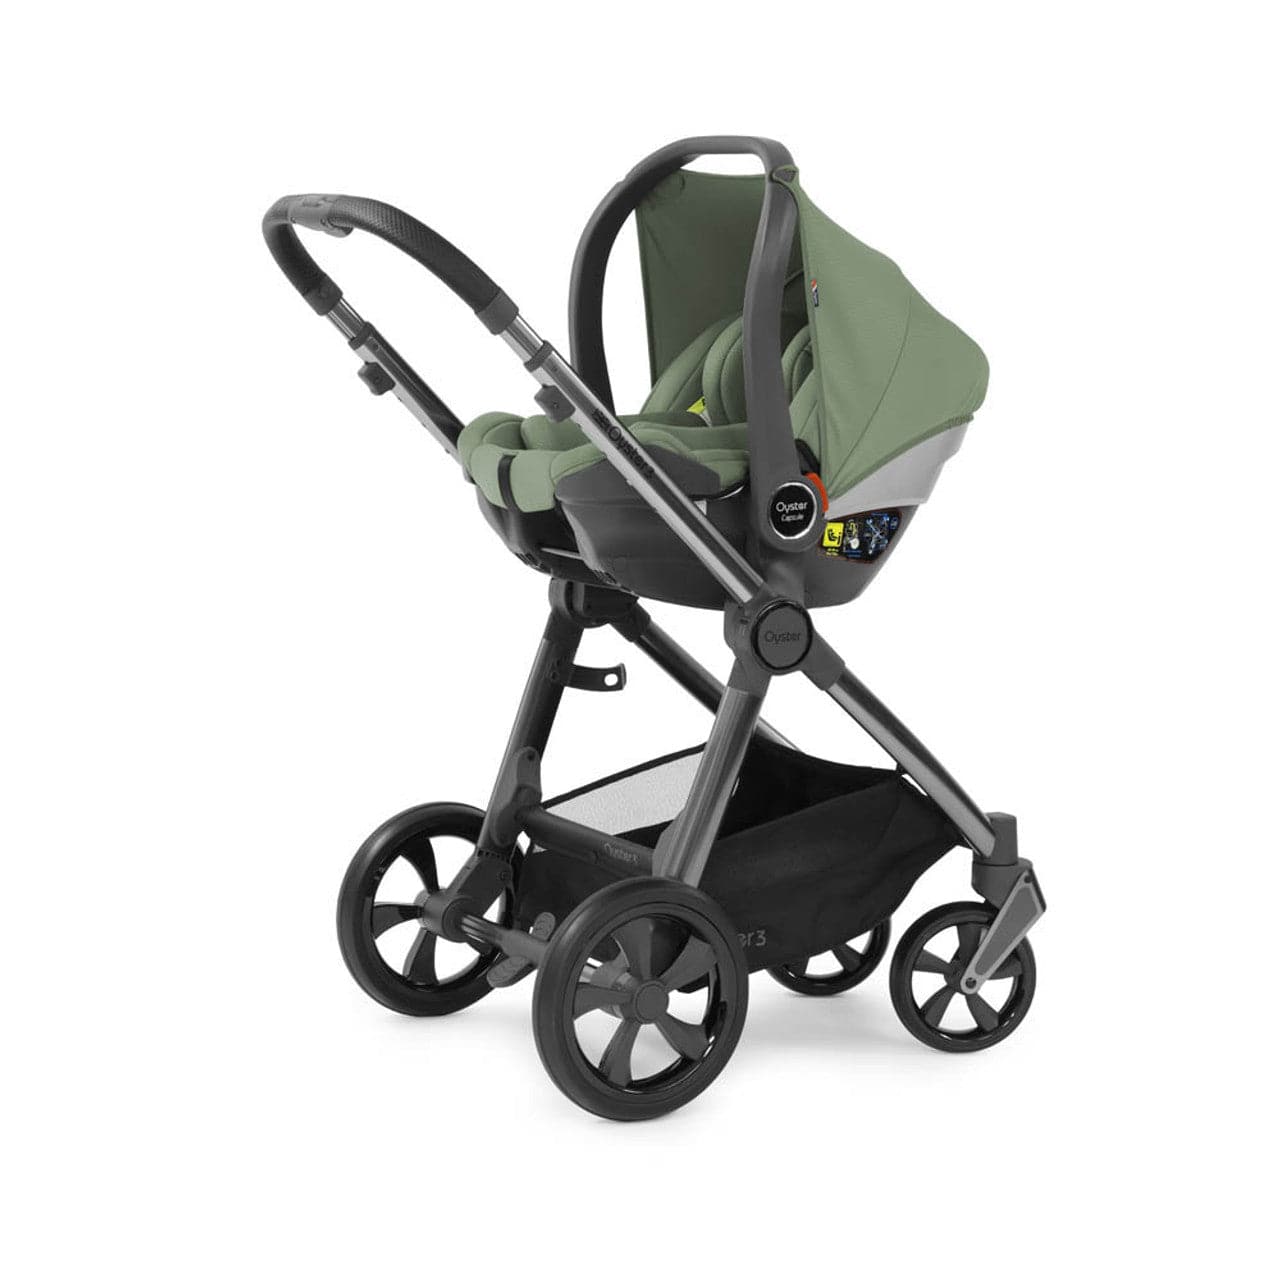 Babystyle Oyster 3 Essential 5 Piece Travel System Bundle - Spearmint -  | For Your Little One